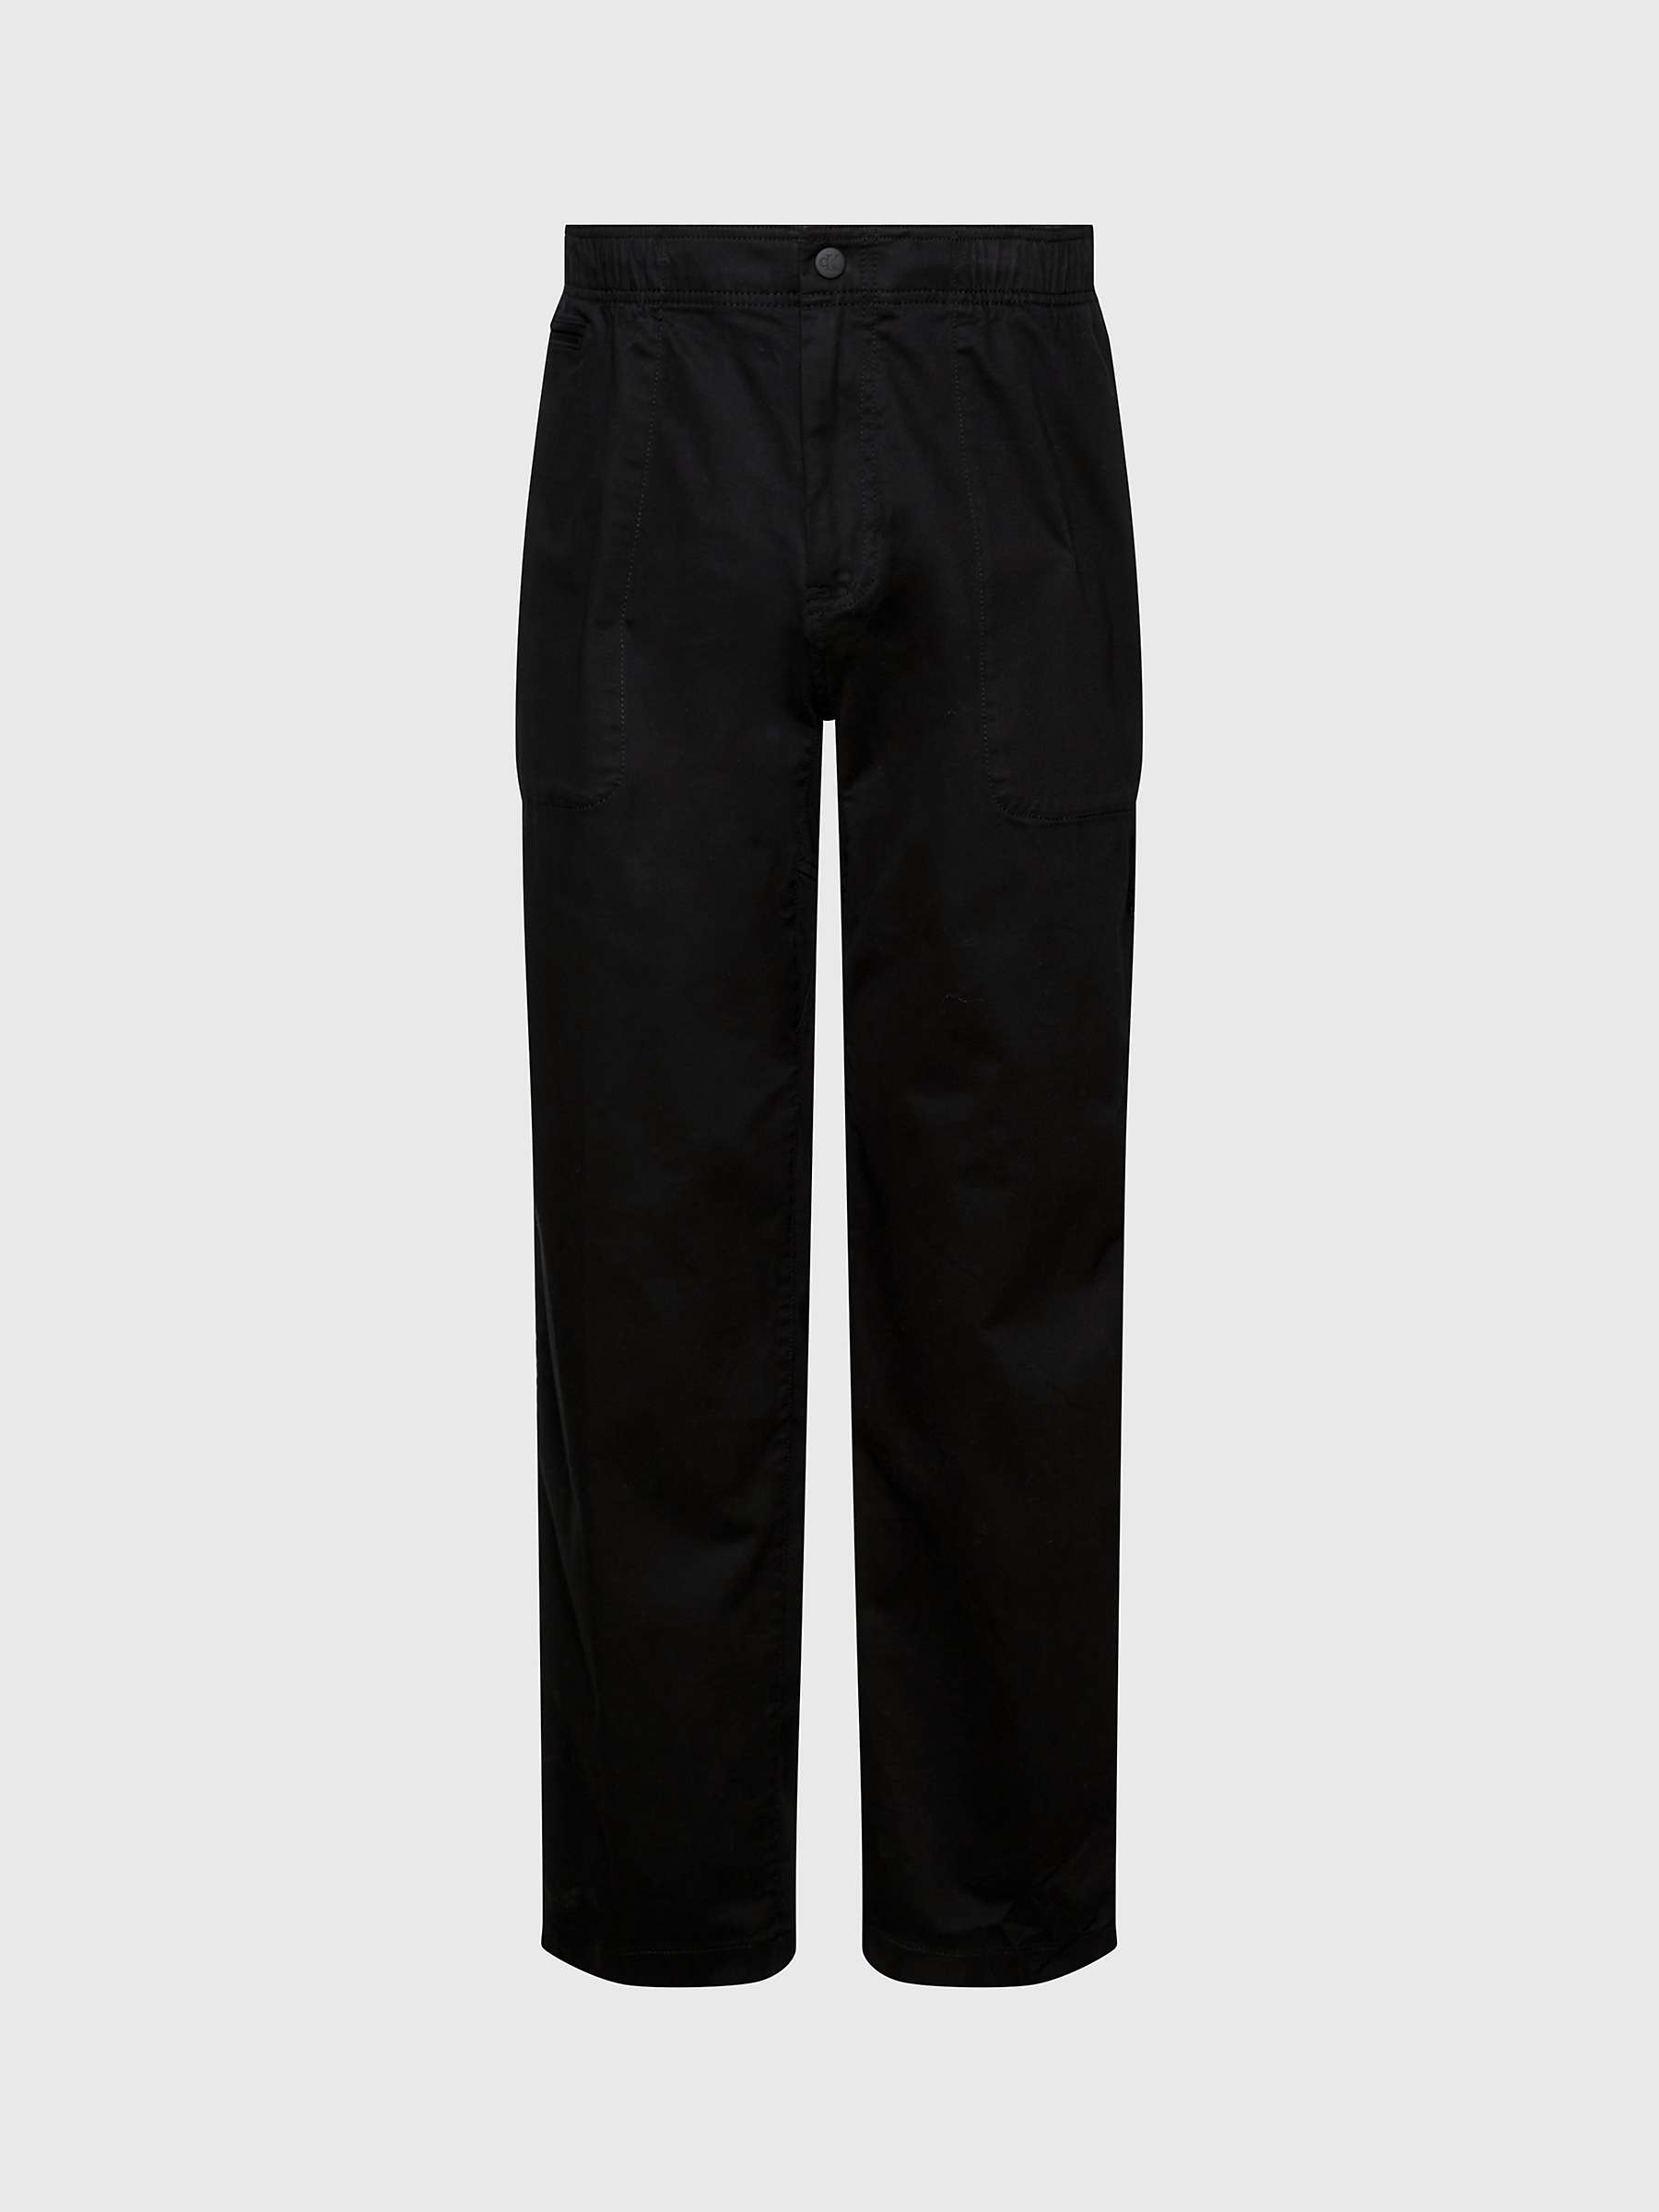 Buy Calvin Klein Jeans Trim Woven Trousers Online at johnlewis.com